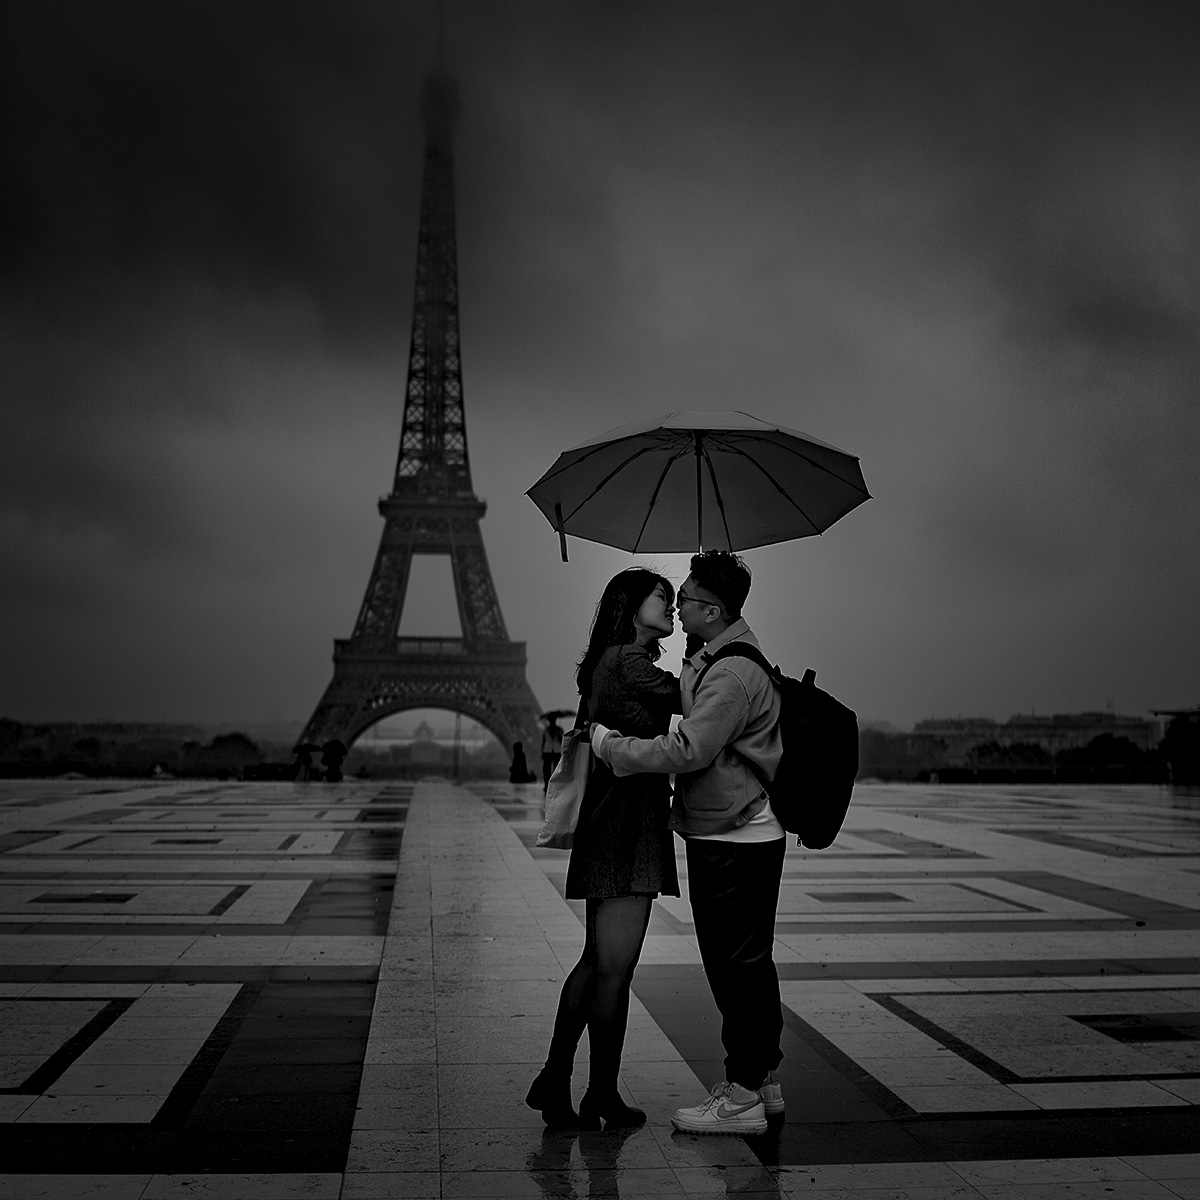 Tourists share a warm, loving embrace on a cold, wet morning at Place du Trocadéro with the Eiffel Tower surrounded by dark rain clouds. #sony #RX1R #sony#RX1Rm2 #bealpha #wetmorning #eiffeltower #paris #tourists #raining #clouds #love #sky #style #cloudy #roamtheplanet #styl ...